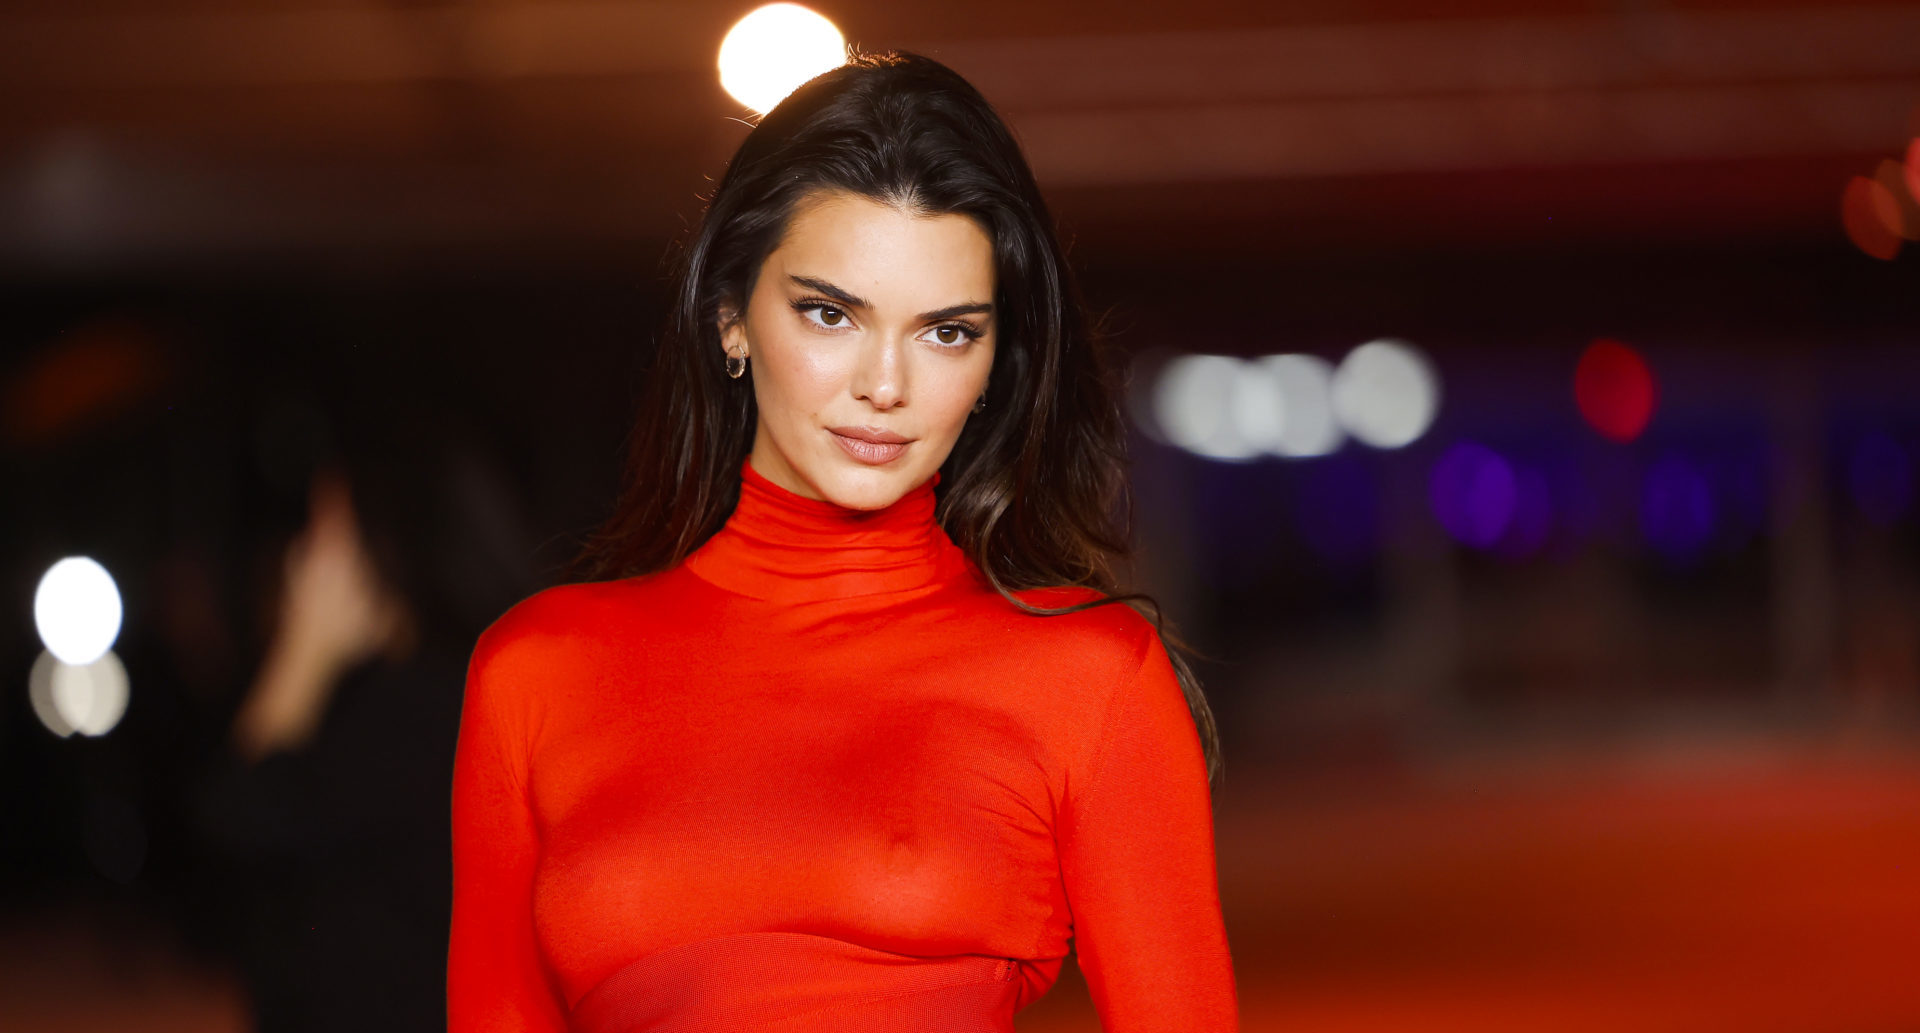 Kendall Jenner's 'dream dress' costs $3k but she looks a million dollars